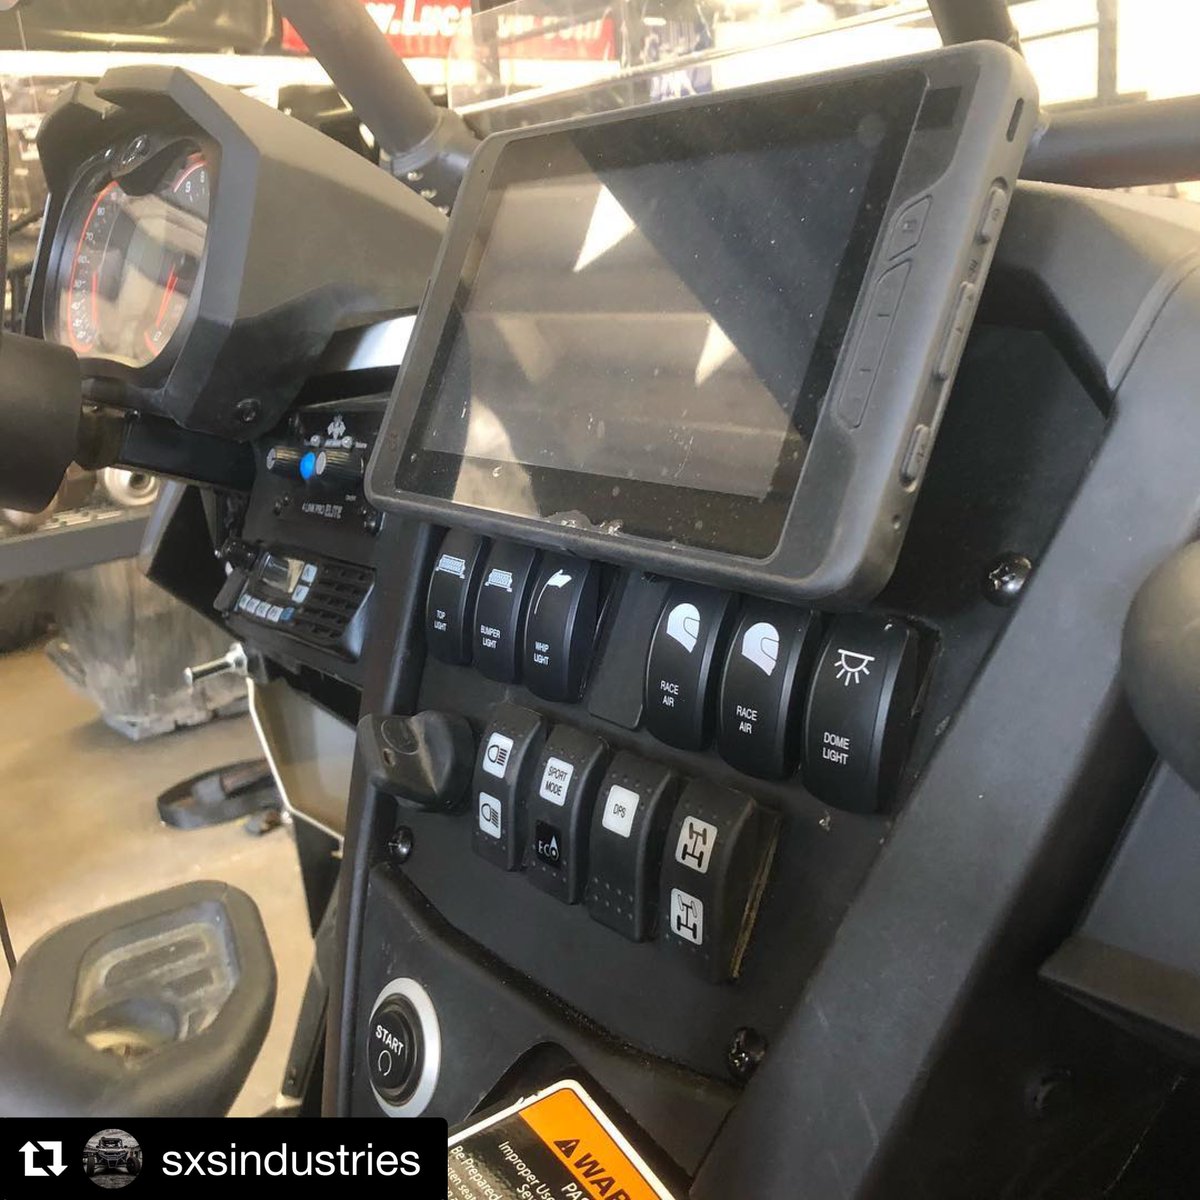 Check out the trick TRX7 mount @sxsindustries created. #canam #sidebyside #nevergetlost #sxsindustries #magellangps #offroad 
 #Repost @sxsindustries with @get_repost
・・・
Clean custom bracket for this @canam #maverickmax hold the @magellantrx perfectly #sxs #custom #gps